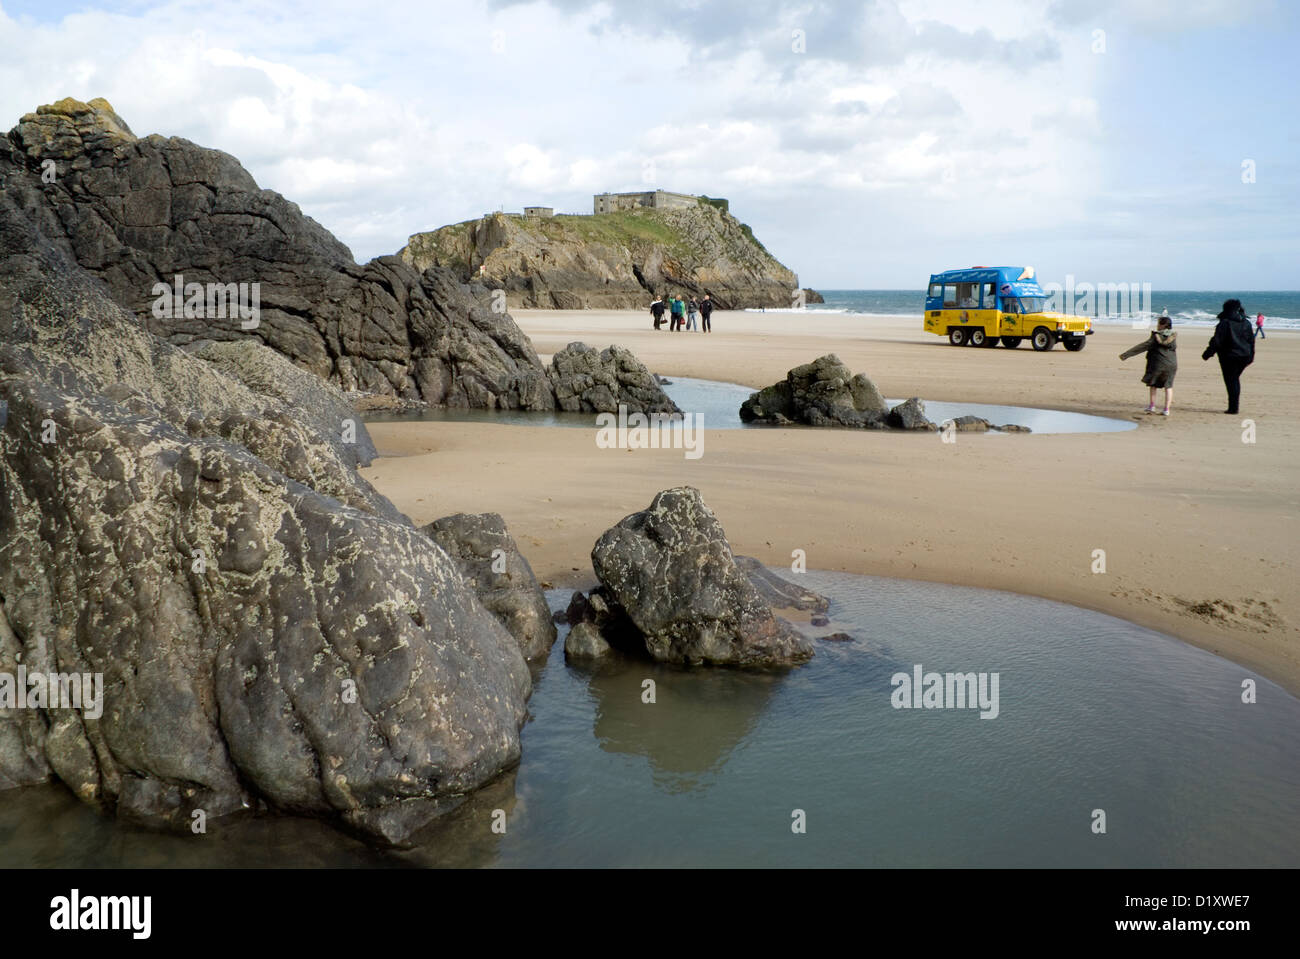 South Beach, Tenby, Pembrokeshire, Galles occidentale. Foto Stock